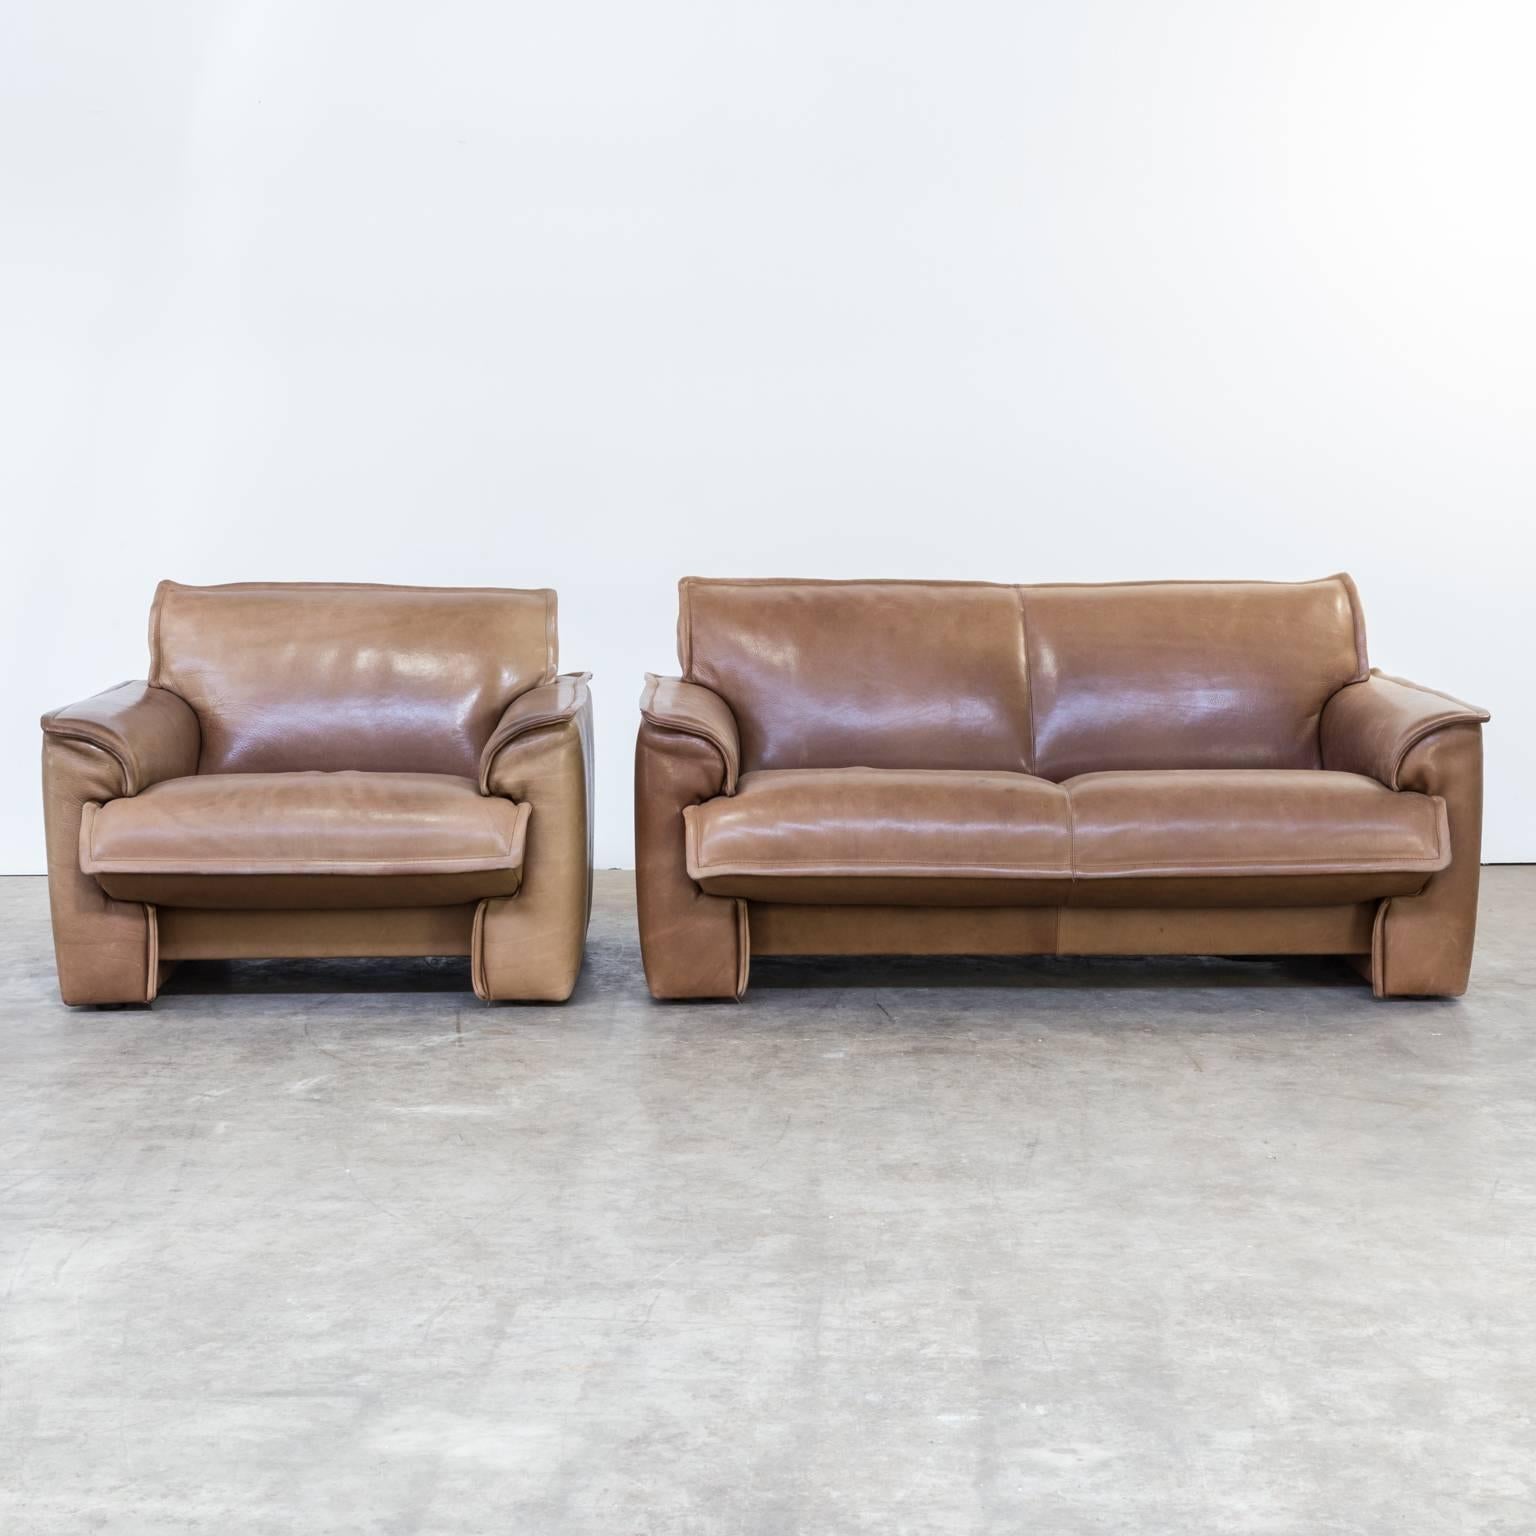 One set 1970s Leolux neckleder seating group 2.5 seat sofa plus one fauteuil. Strong leather, high building quality, equal to De Sede. The set is in good condition, wear consistent with age and use. Dimensions: S: 148cm W x 91cm D x74cm H. F: 93cm W